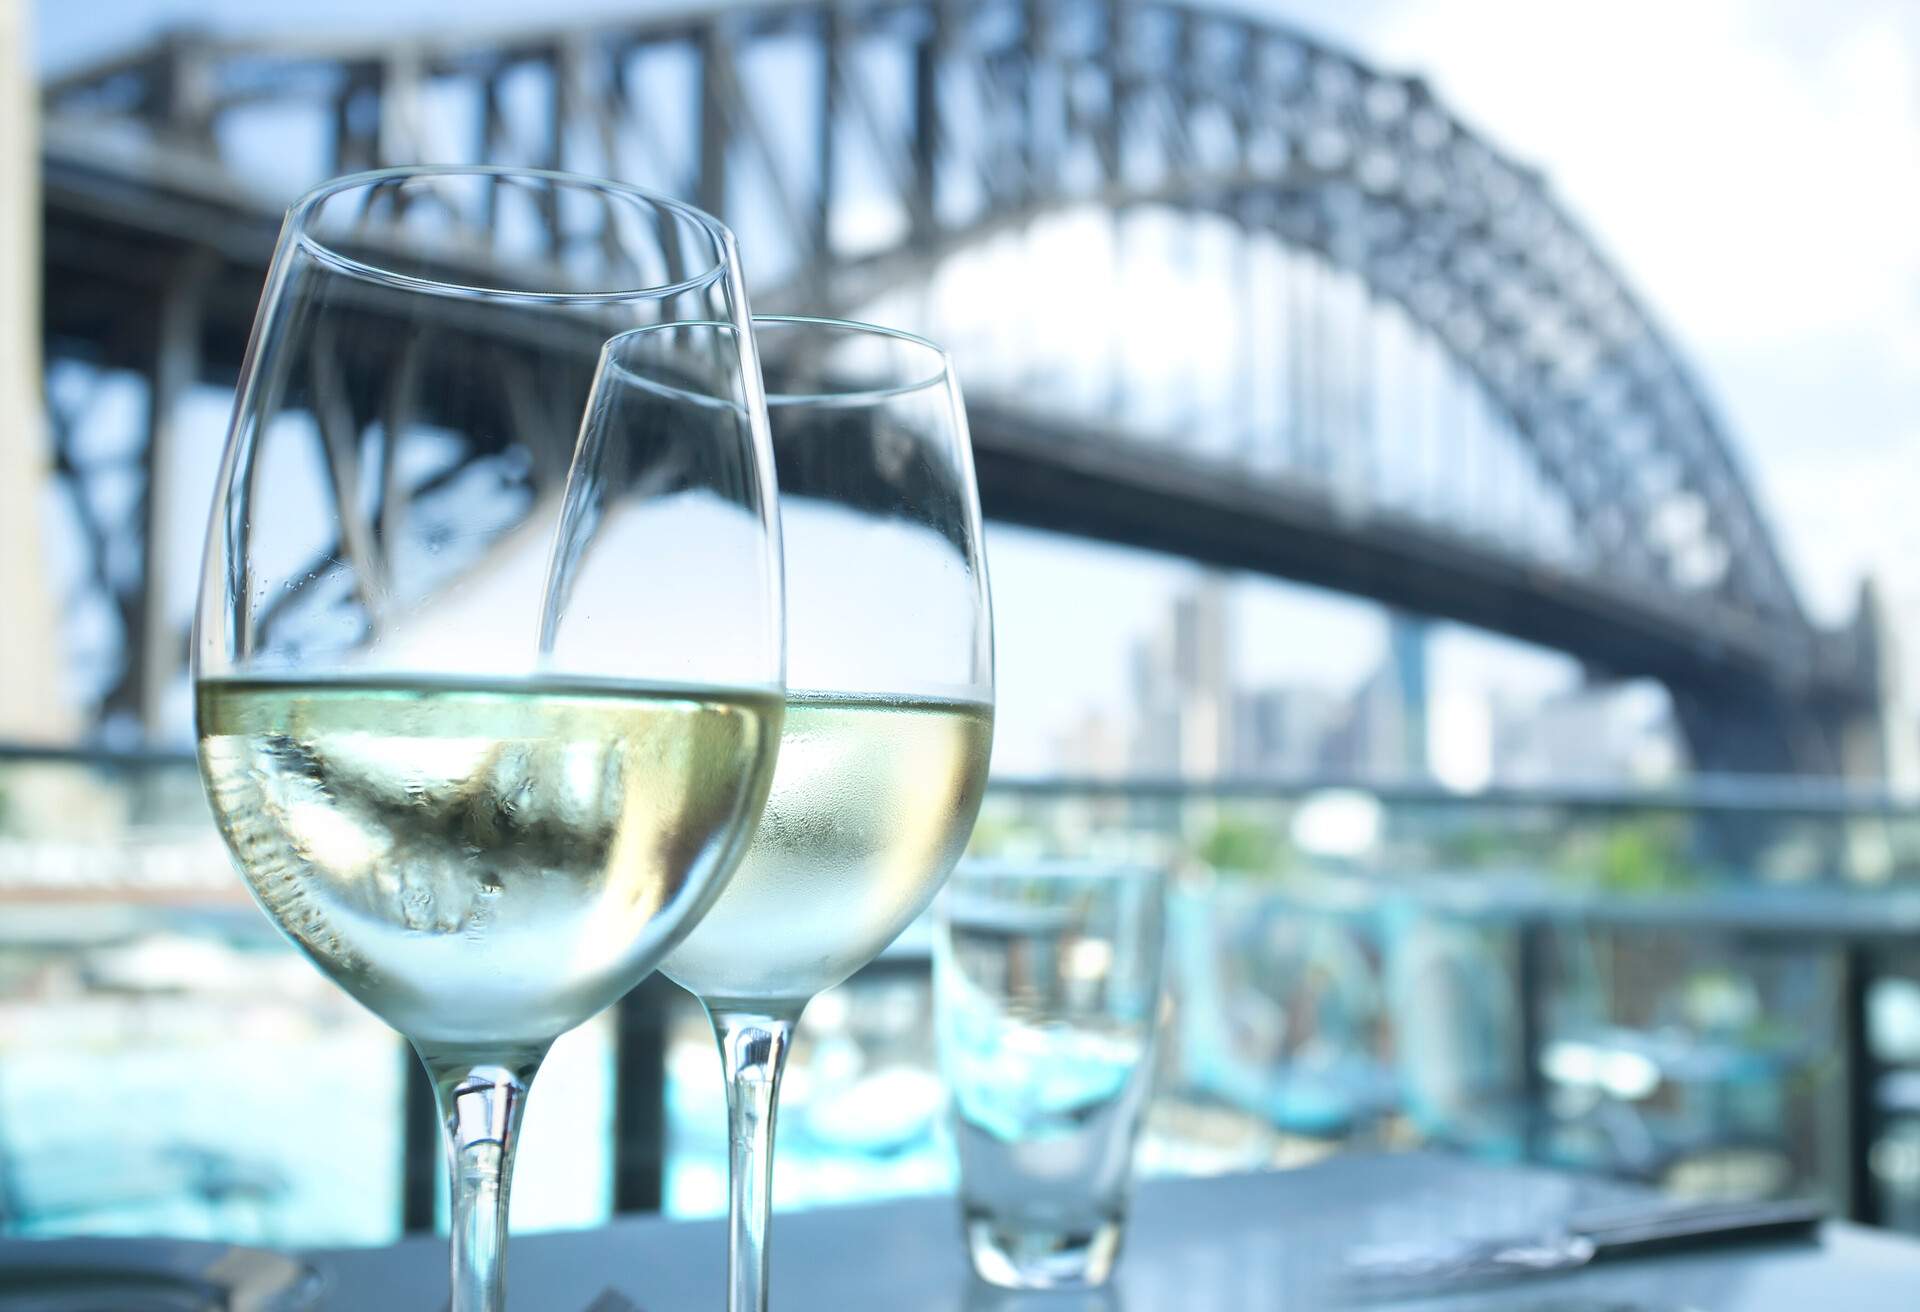 Wine glasses in a restaurant with Sydney Harbour Bridge in the background